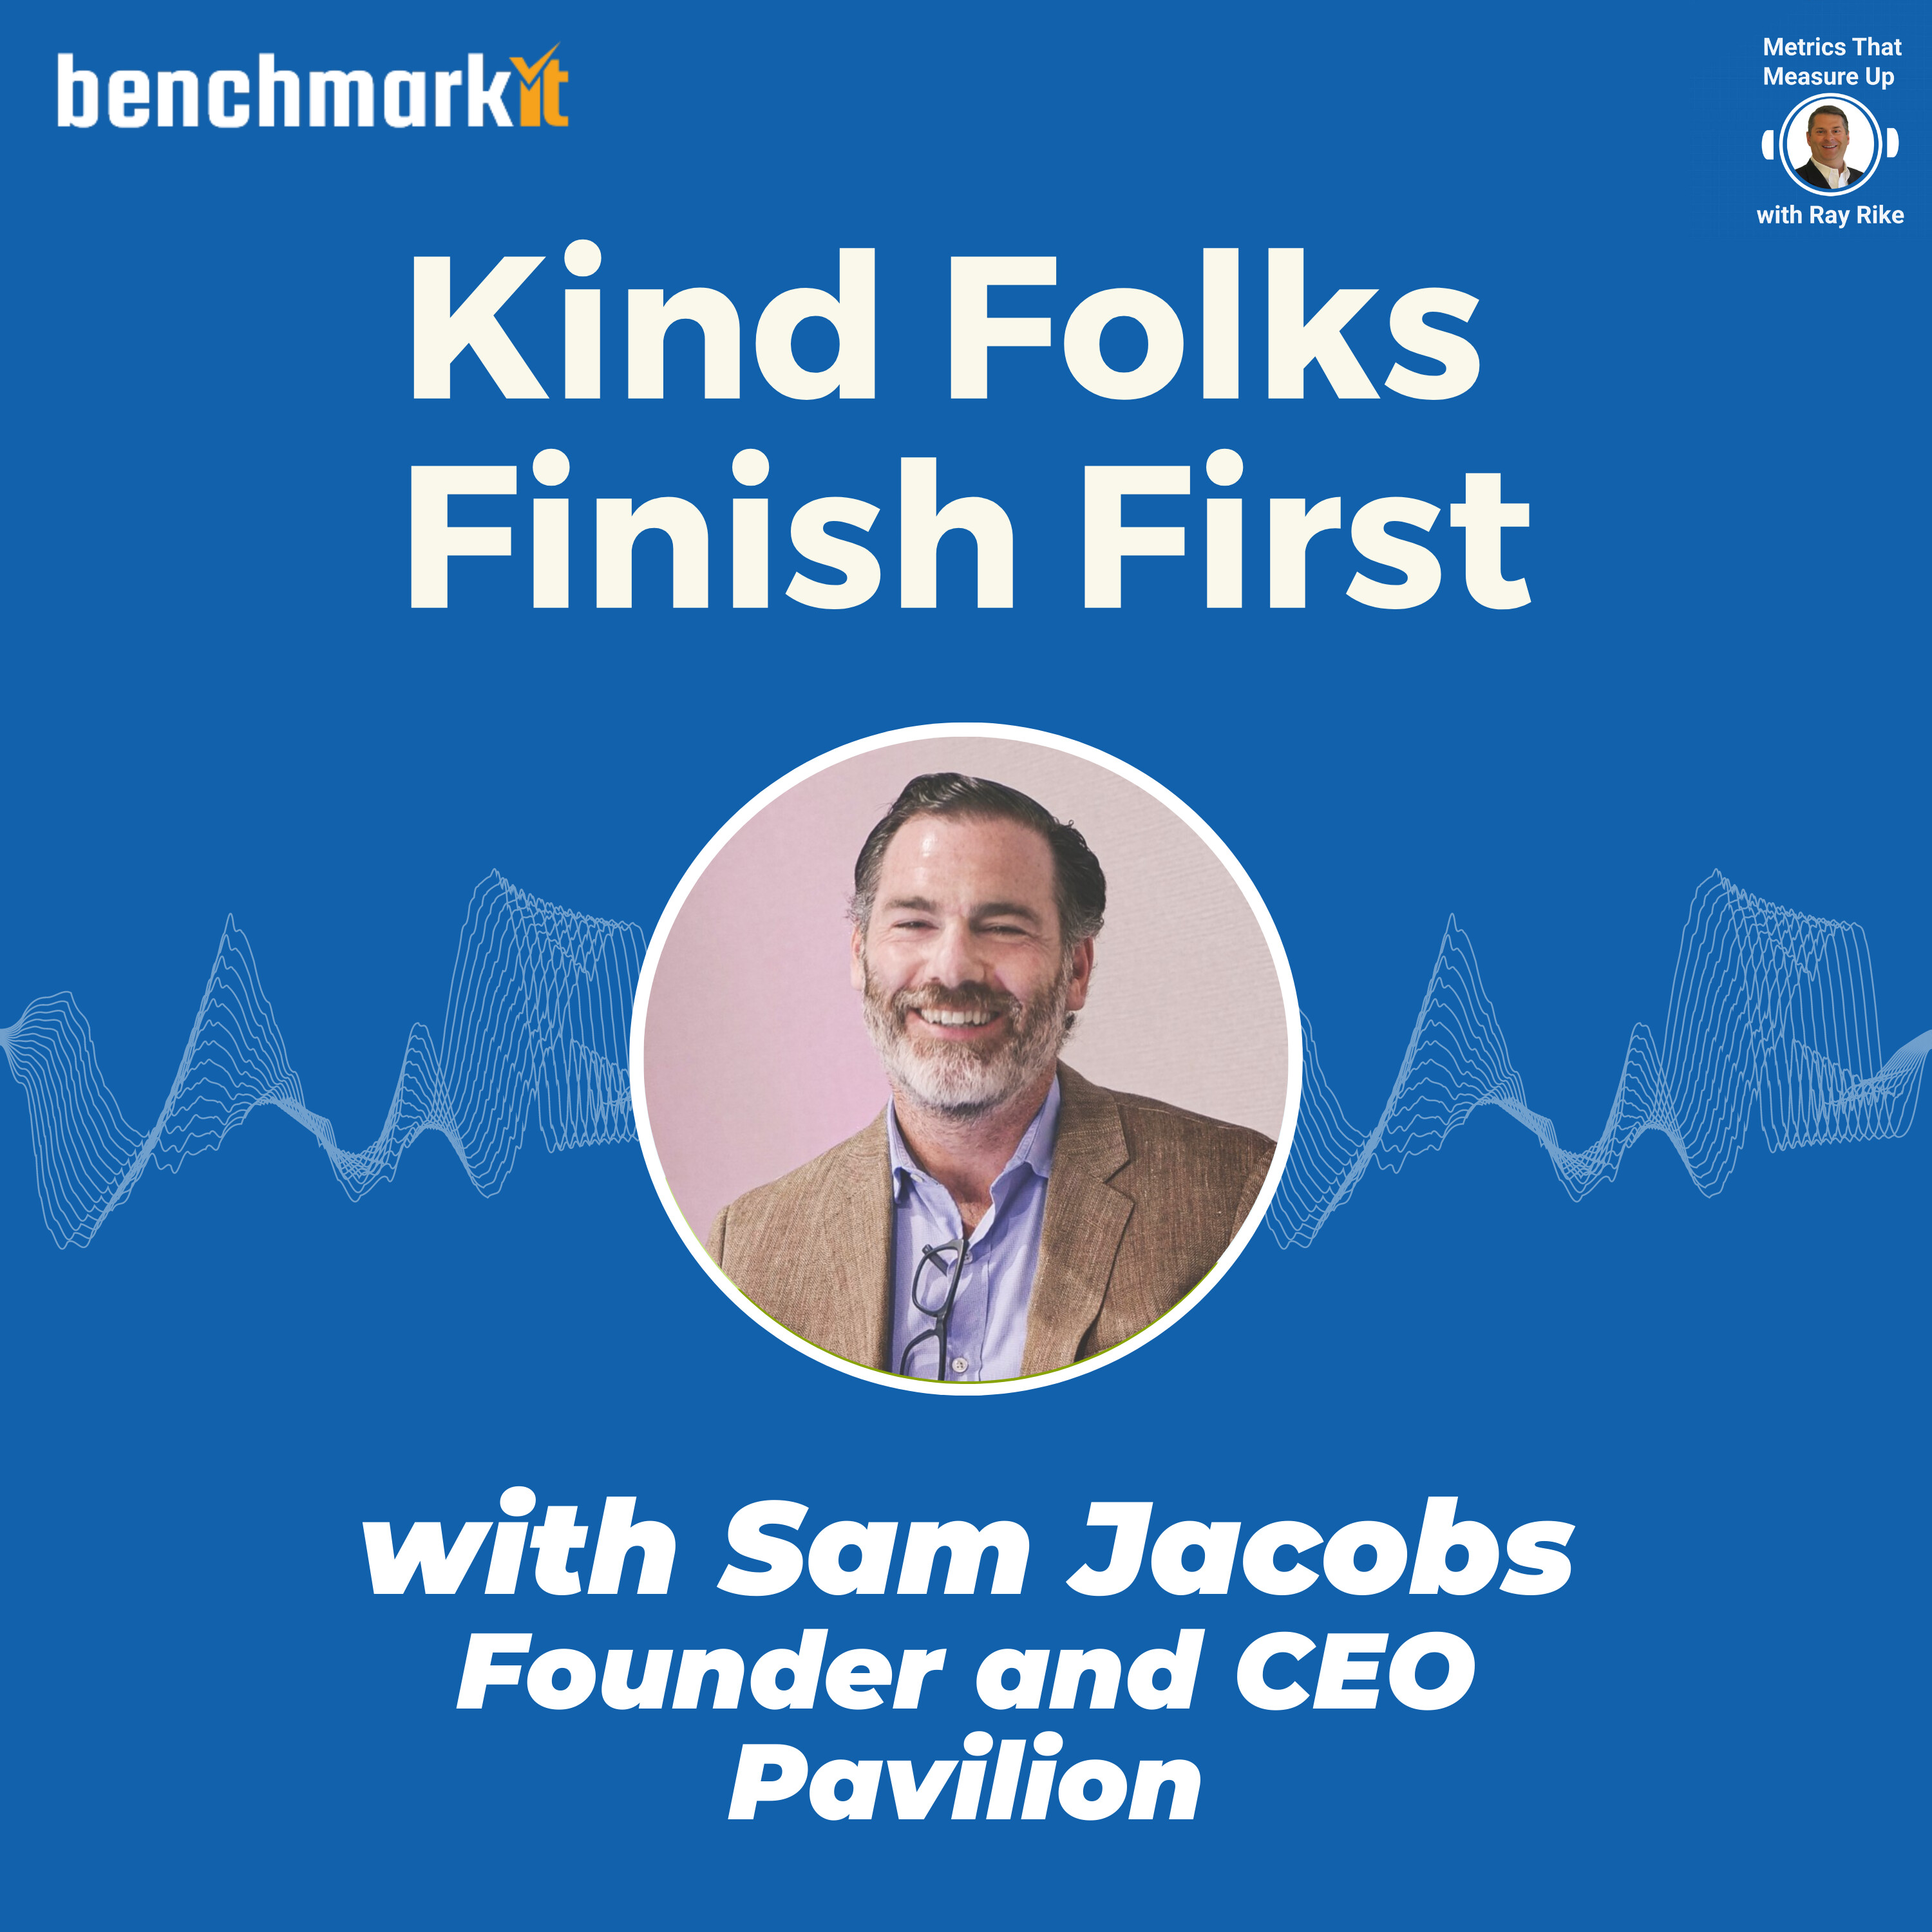 Kind Folks Finish First - Sam Jacobs, Founder and CEO Pavilion